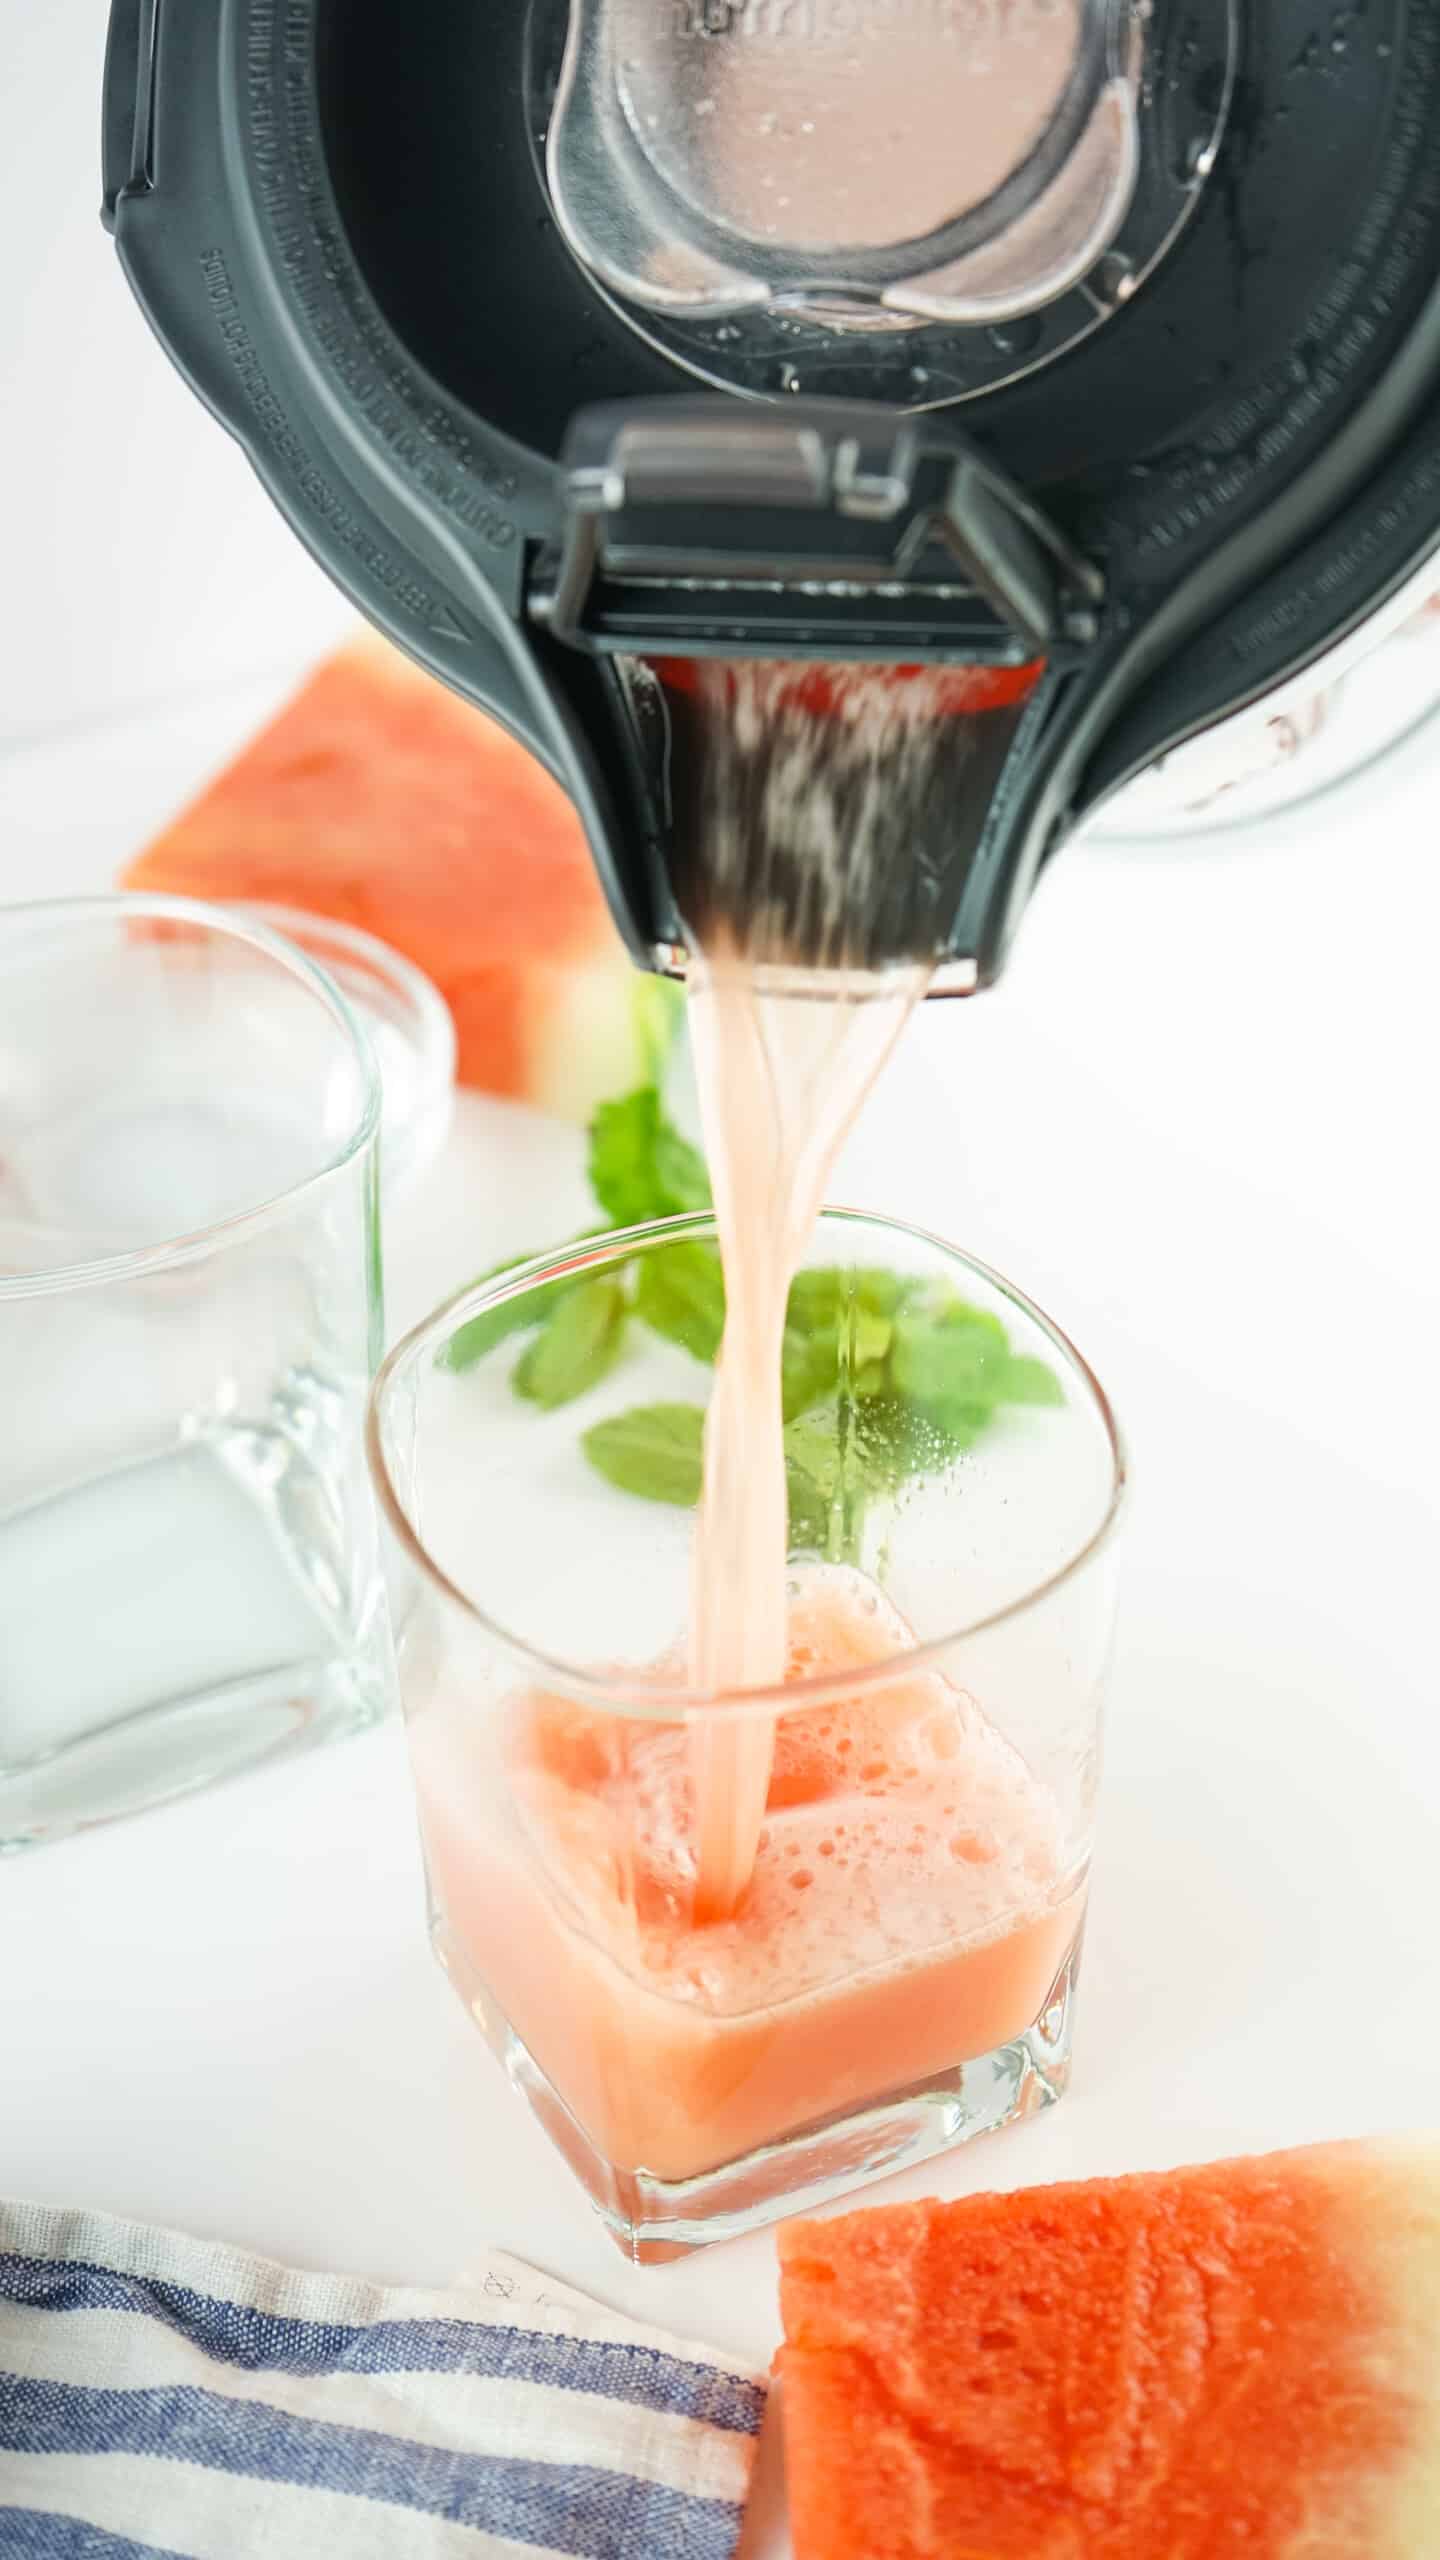 Pour the liquid into a glass and garnish with watermelon and mint. 